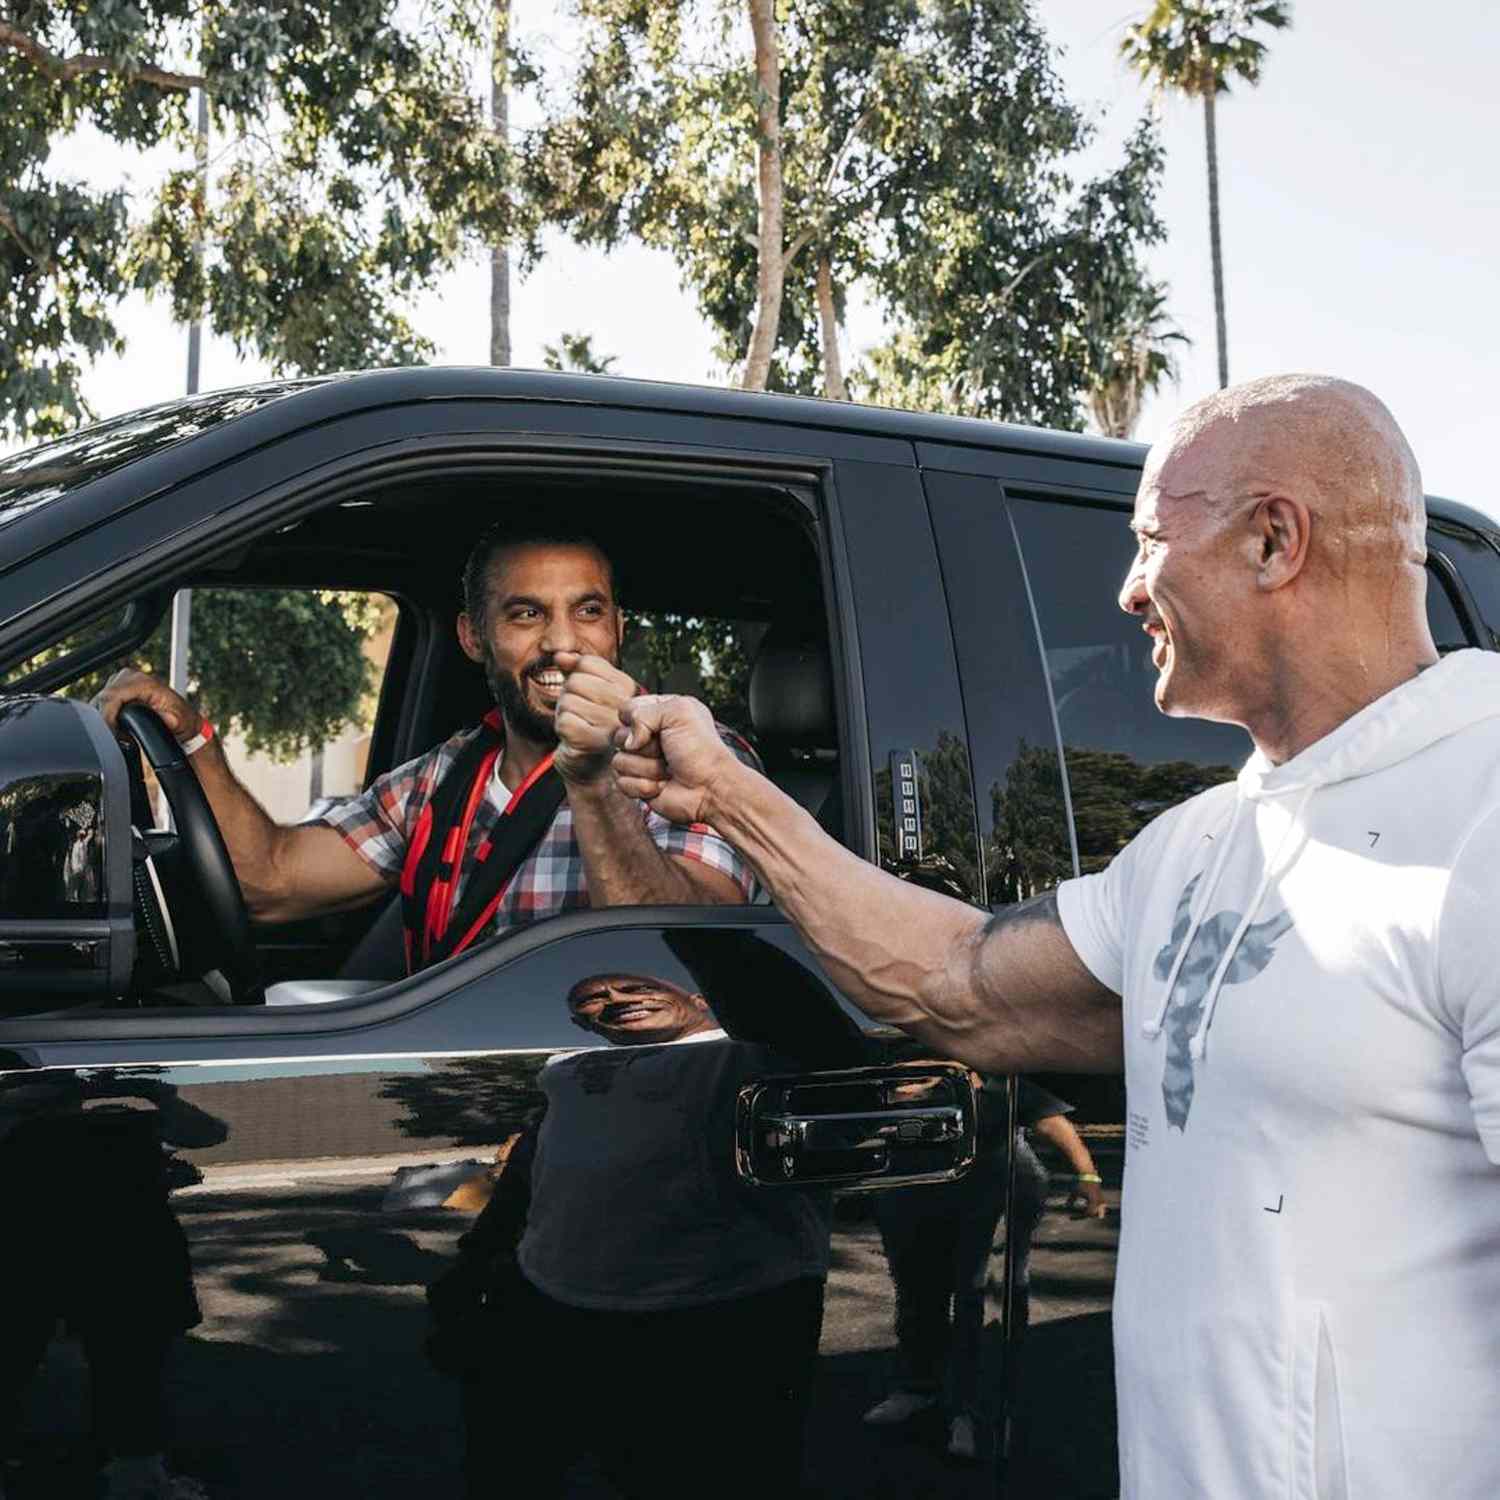 Dwayne Johnson Opens About About Why He Gave His Truck to Navy Vet | PEOPLE.com